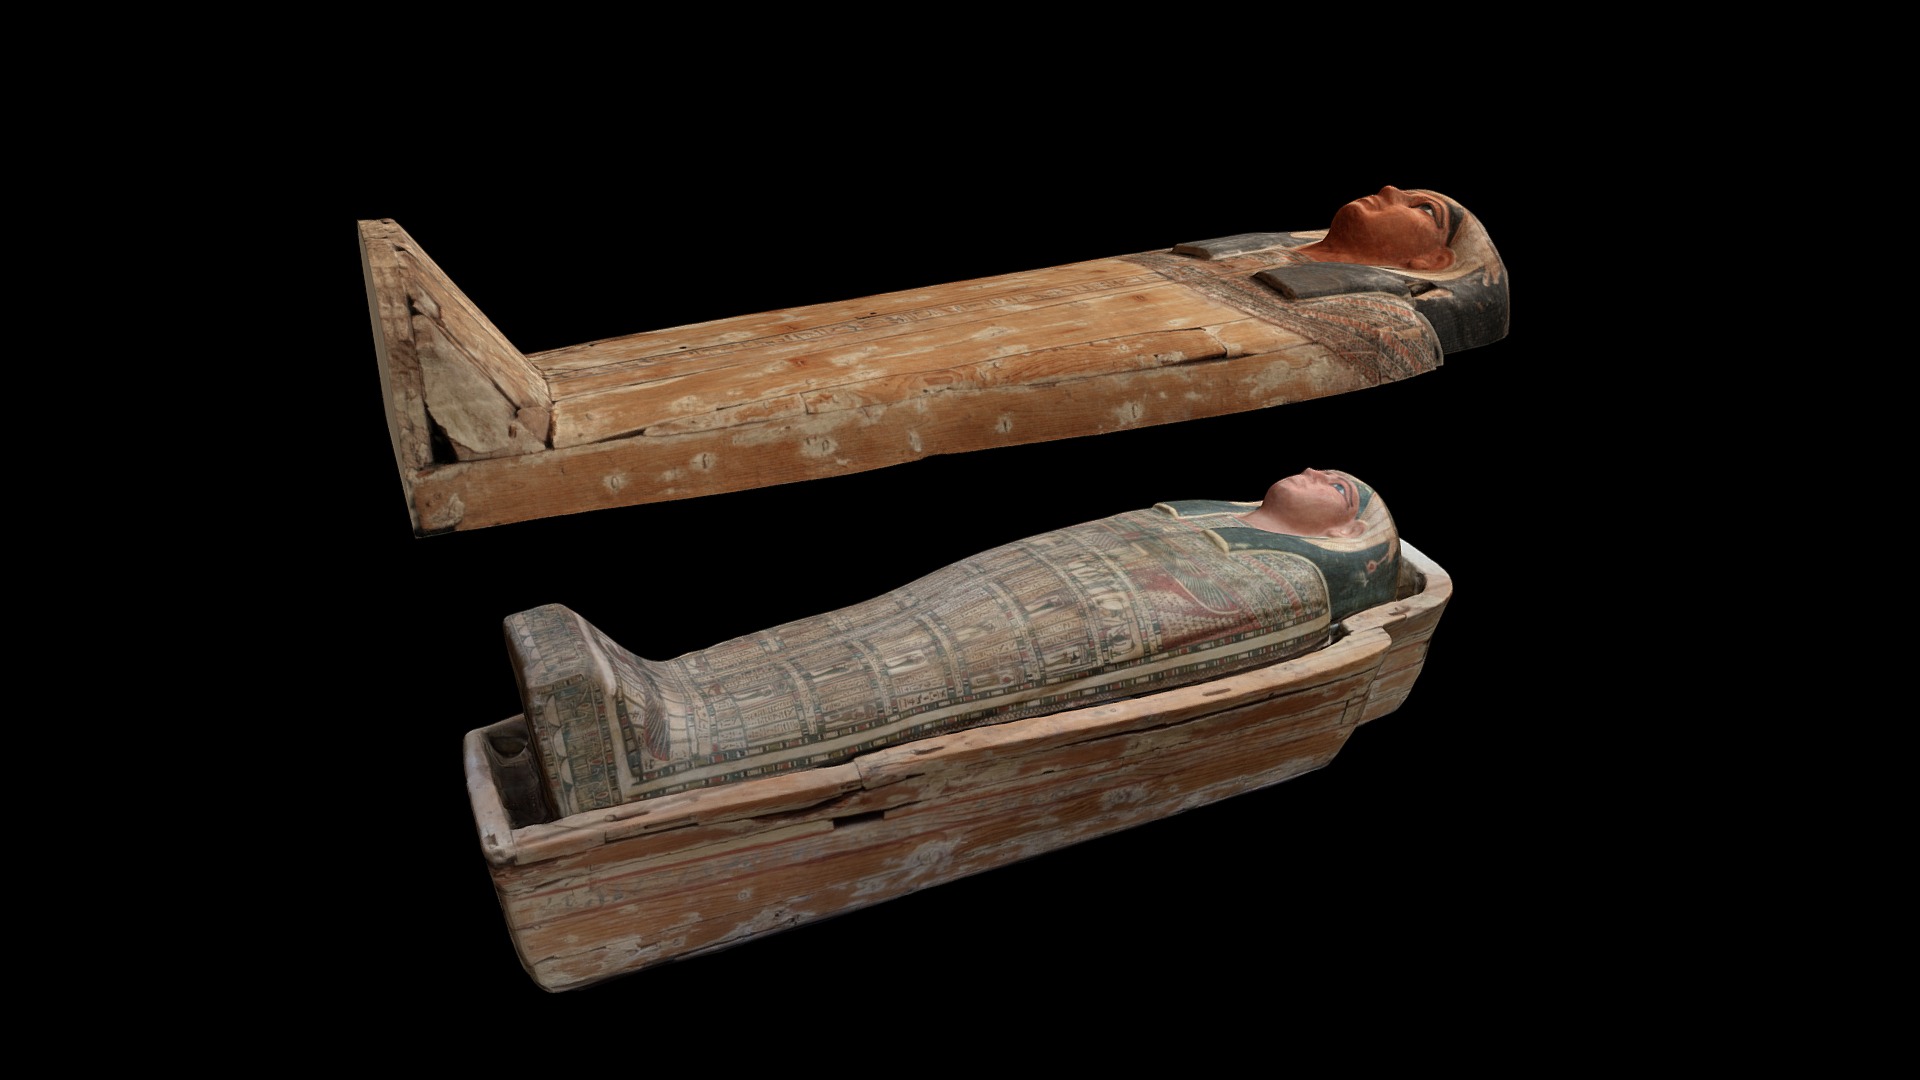 Nested coffins of the Lady Iawttayesheret from the Charlotte Lichirie Collection of Egyptian Art, Michael C. Carlos Museum, Emory University, Atlanta, GA (acc. no. 1999.1.8,a-d).

This model shows the inner and outer coffins of the Lady Iawttayesheret who was a &ldquo;great follower of the Diviine Adoratrice of Amun.